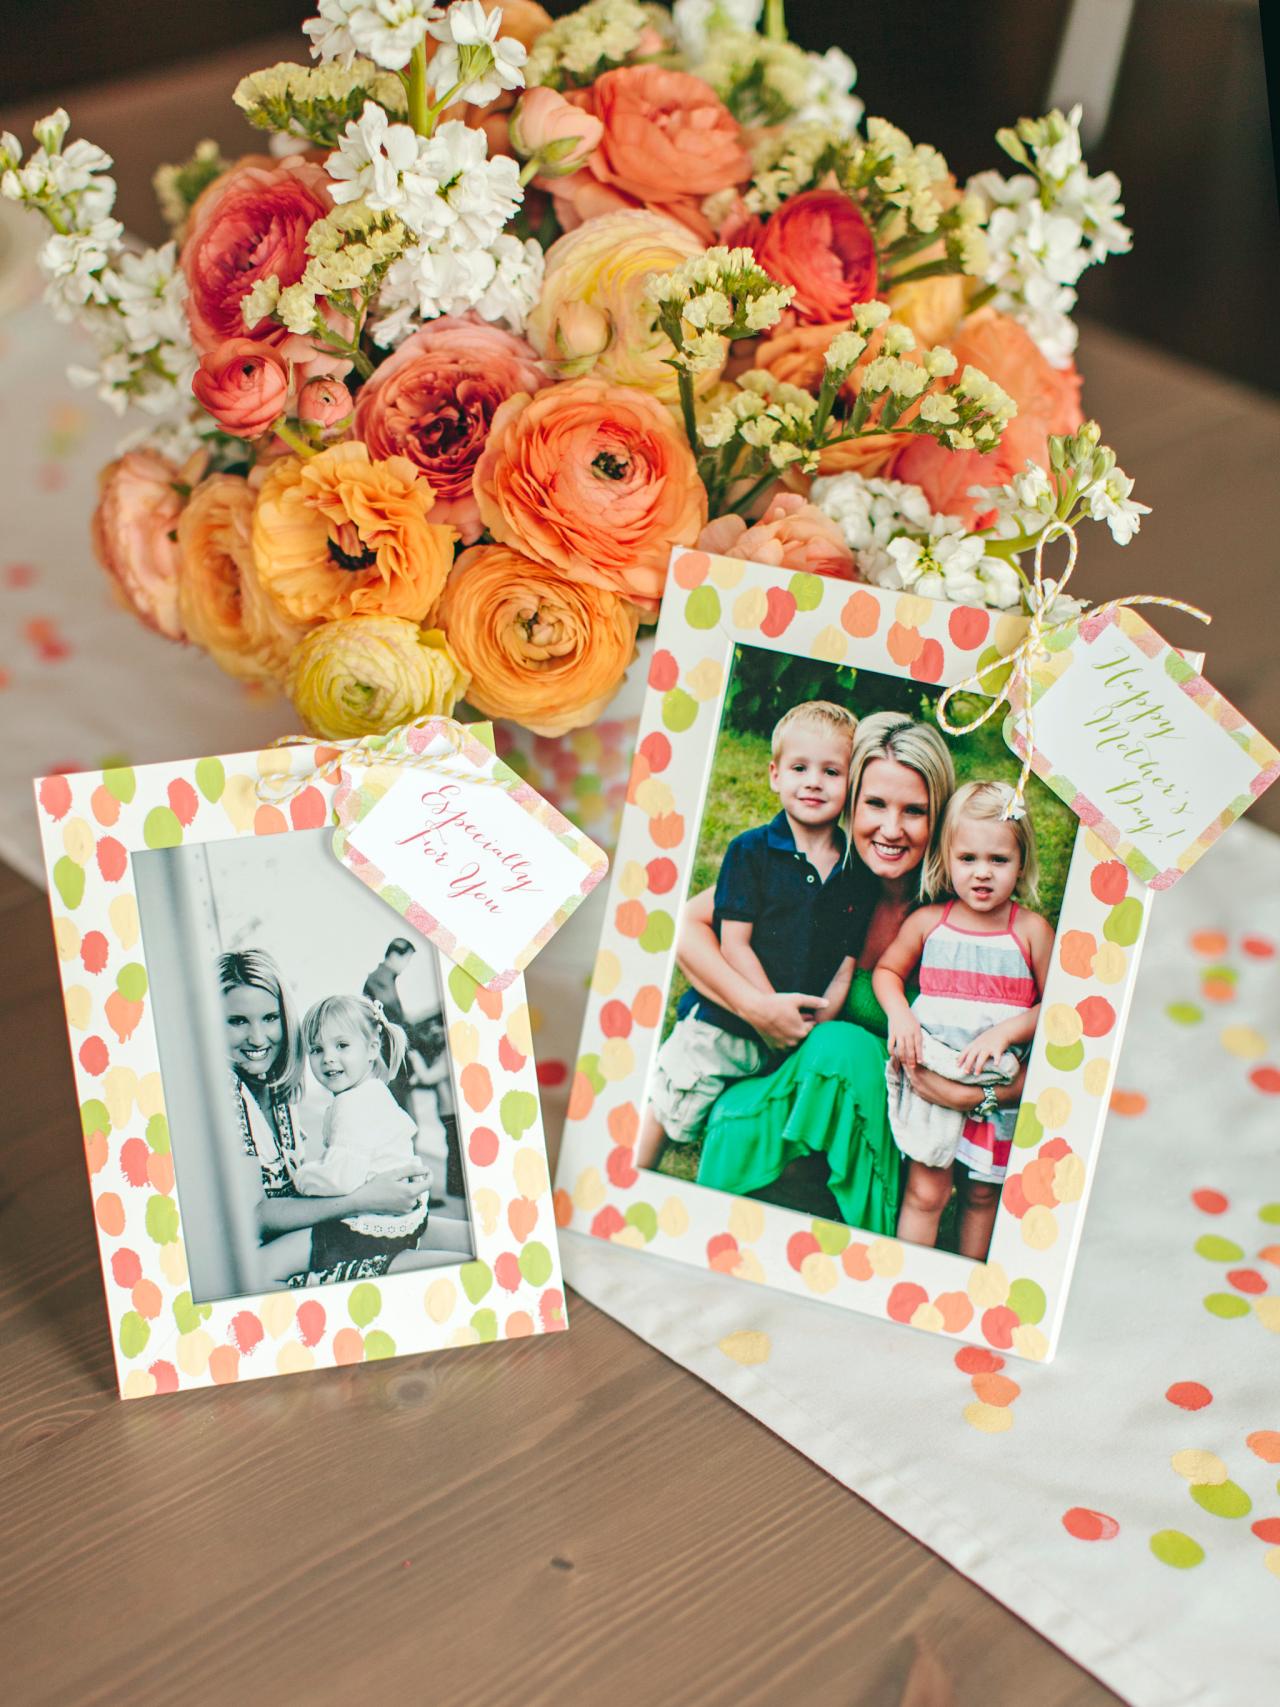 Mother's Day Plant Gift Idea + Printable - Three Kids and a Fish